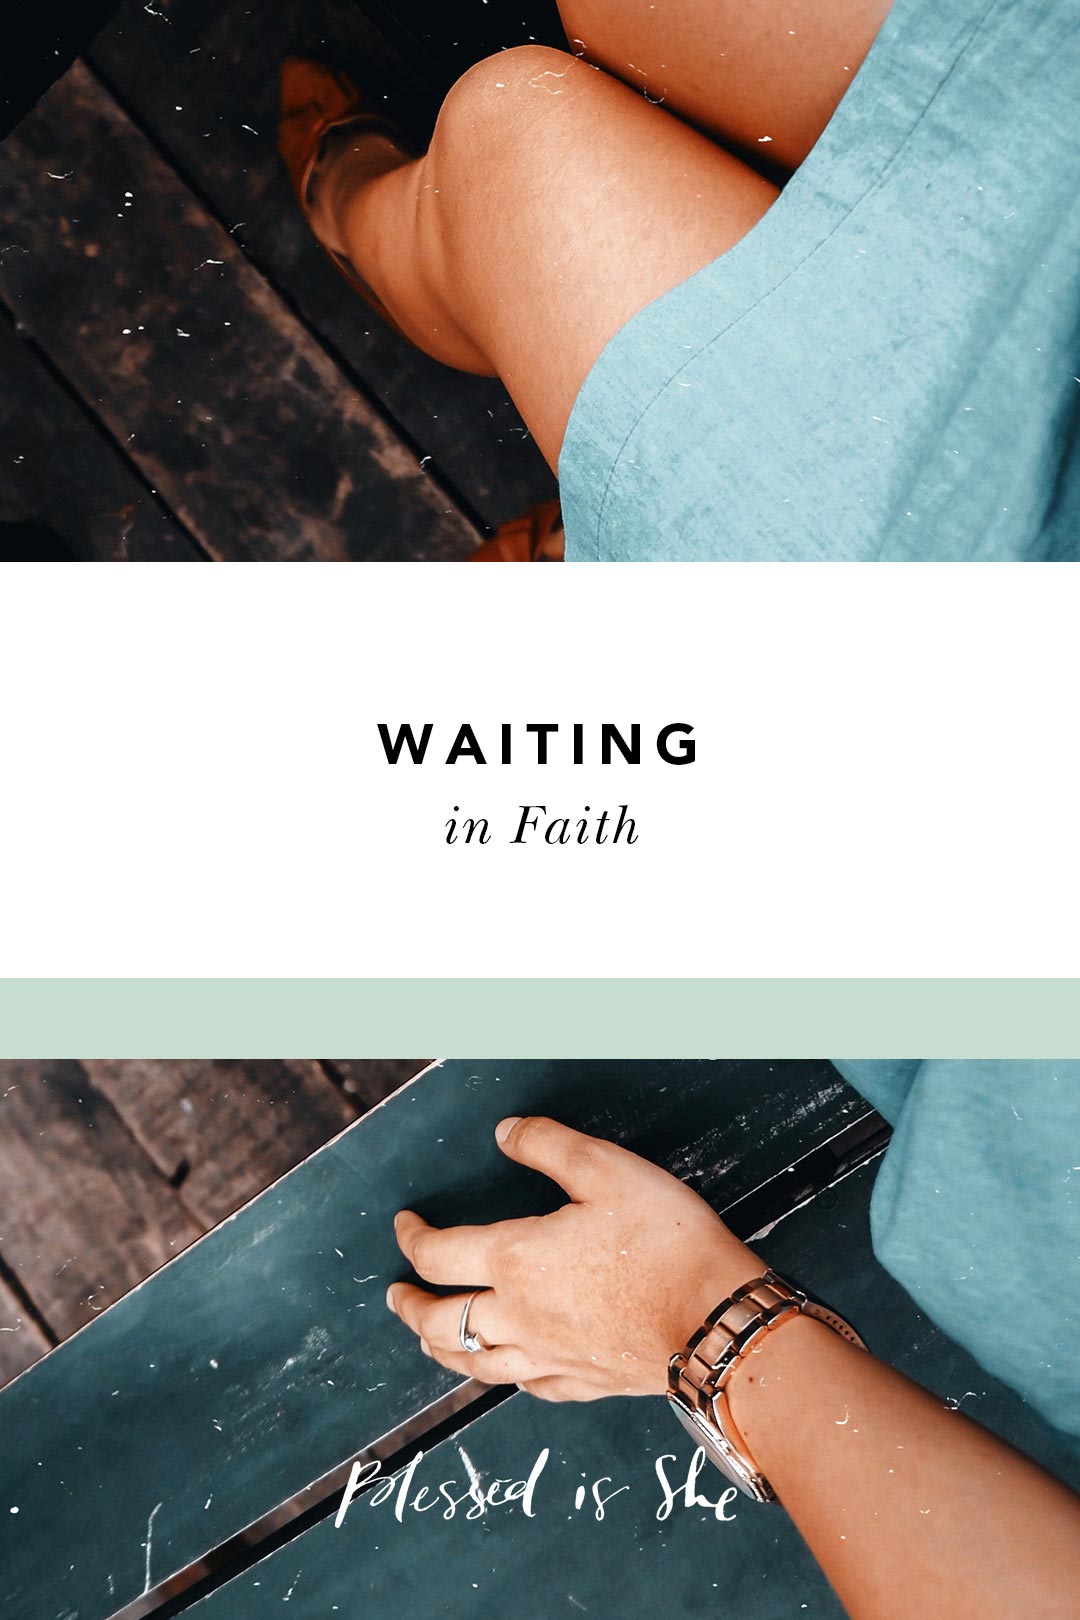 how to wait in faith when it's hard